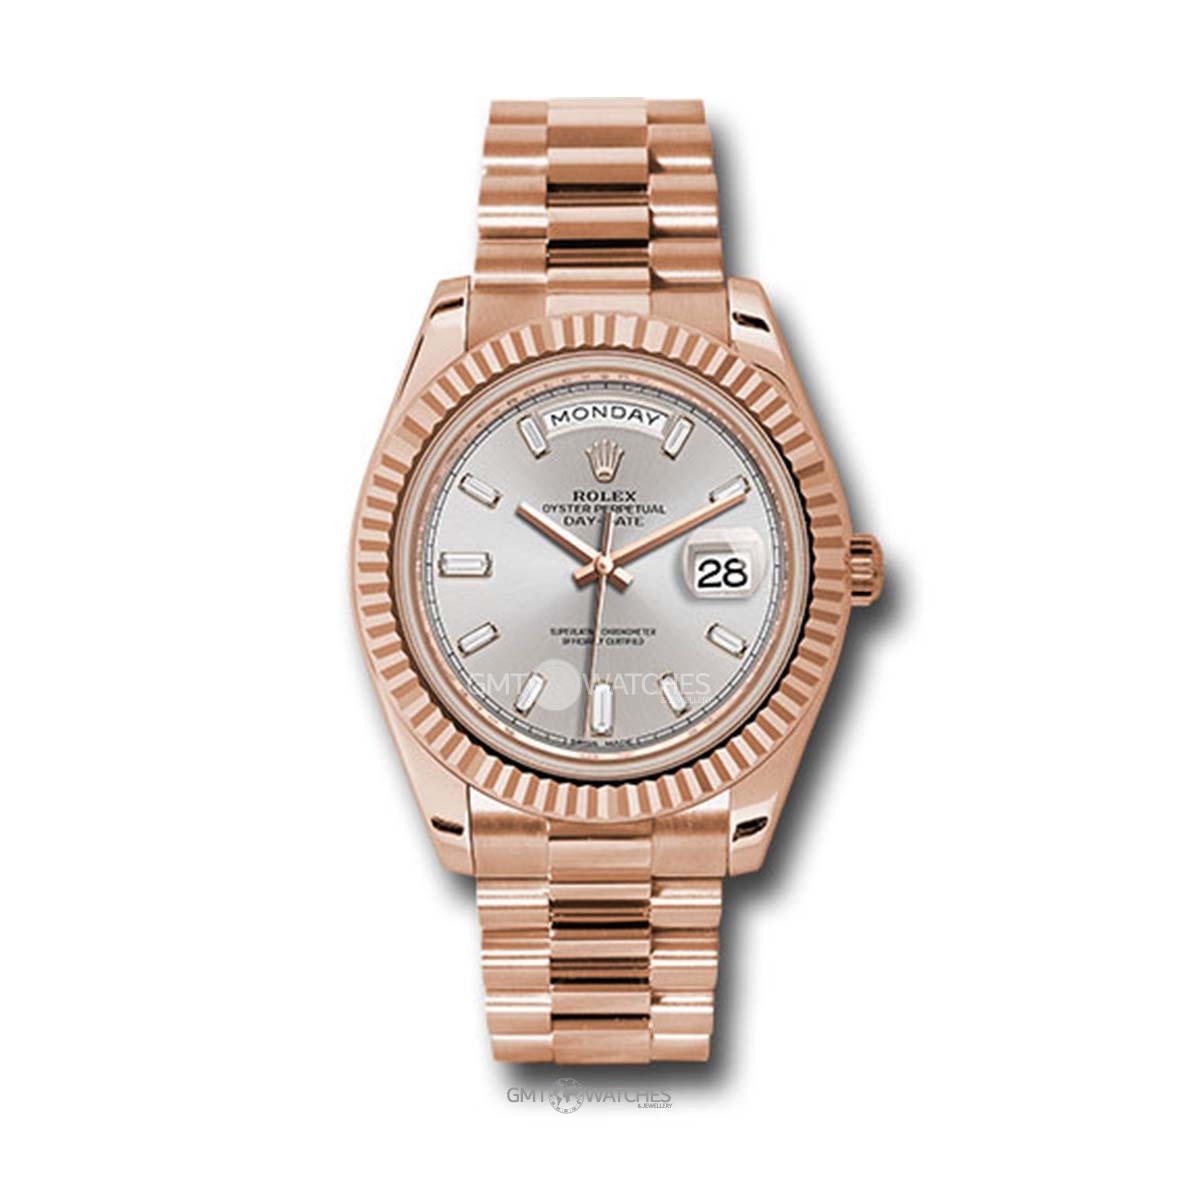 Rolex Oyster Perpetual Day-Date 40mm 18k Everose Gold 228235 sdbdp